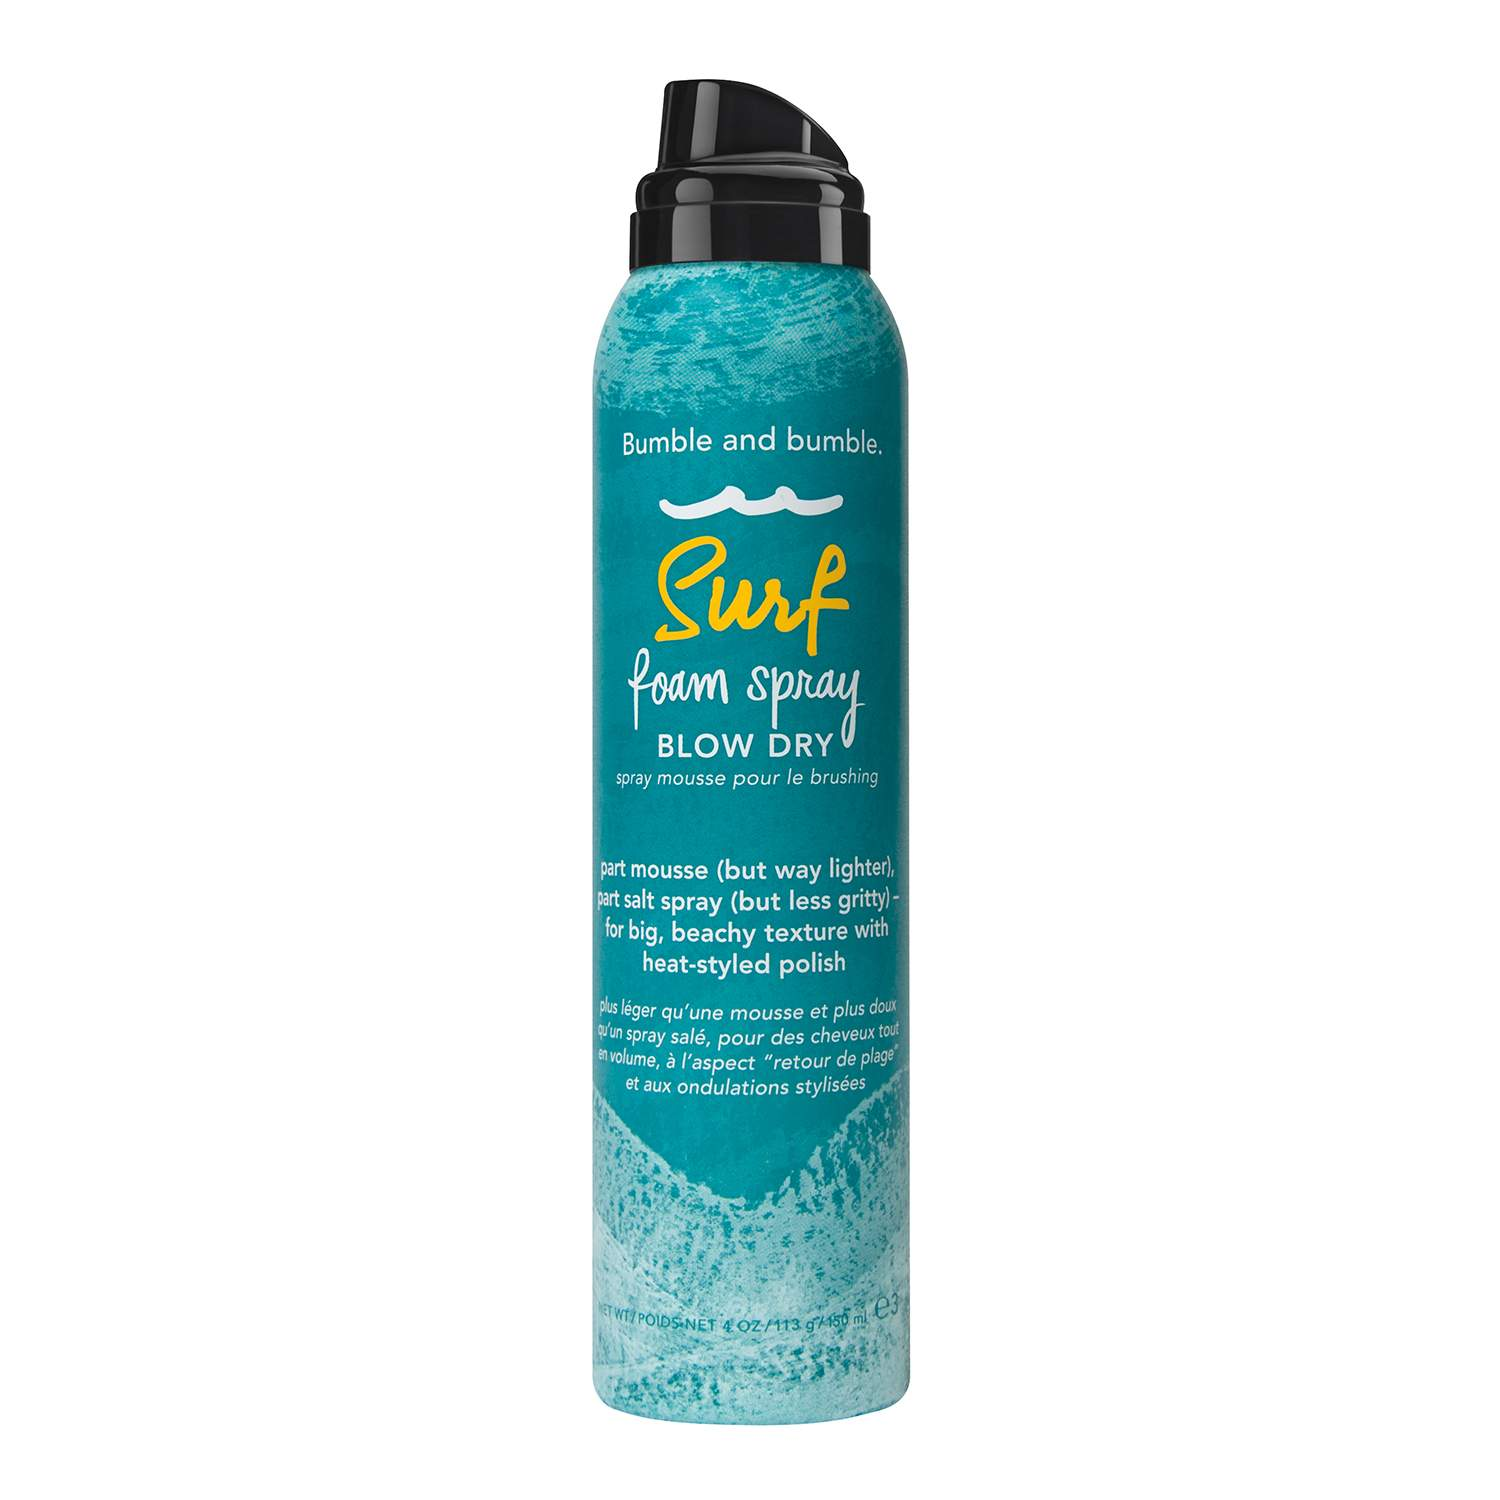 Bumble and bumble. Surf Blow Dry Foam Bumble and bumble. Surf Blow Dry Foam 1